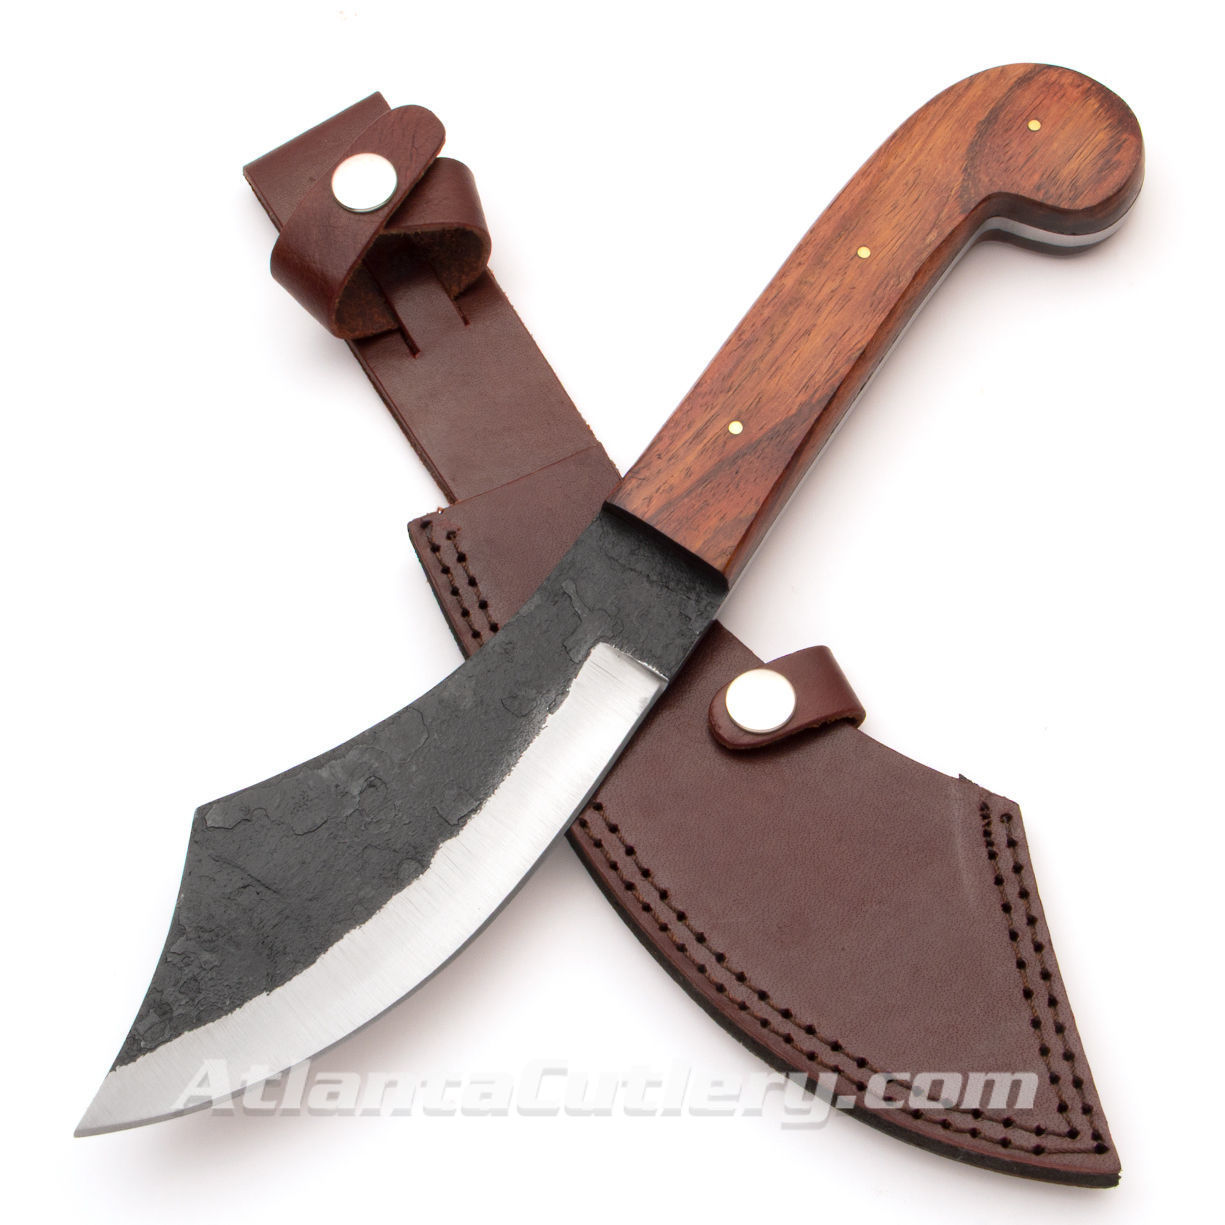 heavy duty short scimitar knife has full-tang carbon steel blade, hardwood grip with brass pins, and rough forged blade 